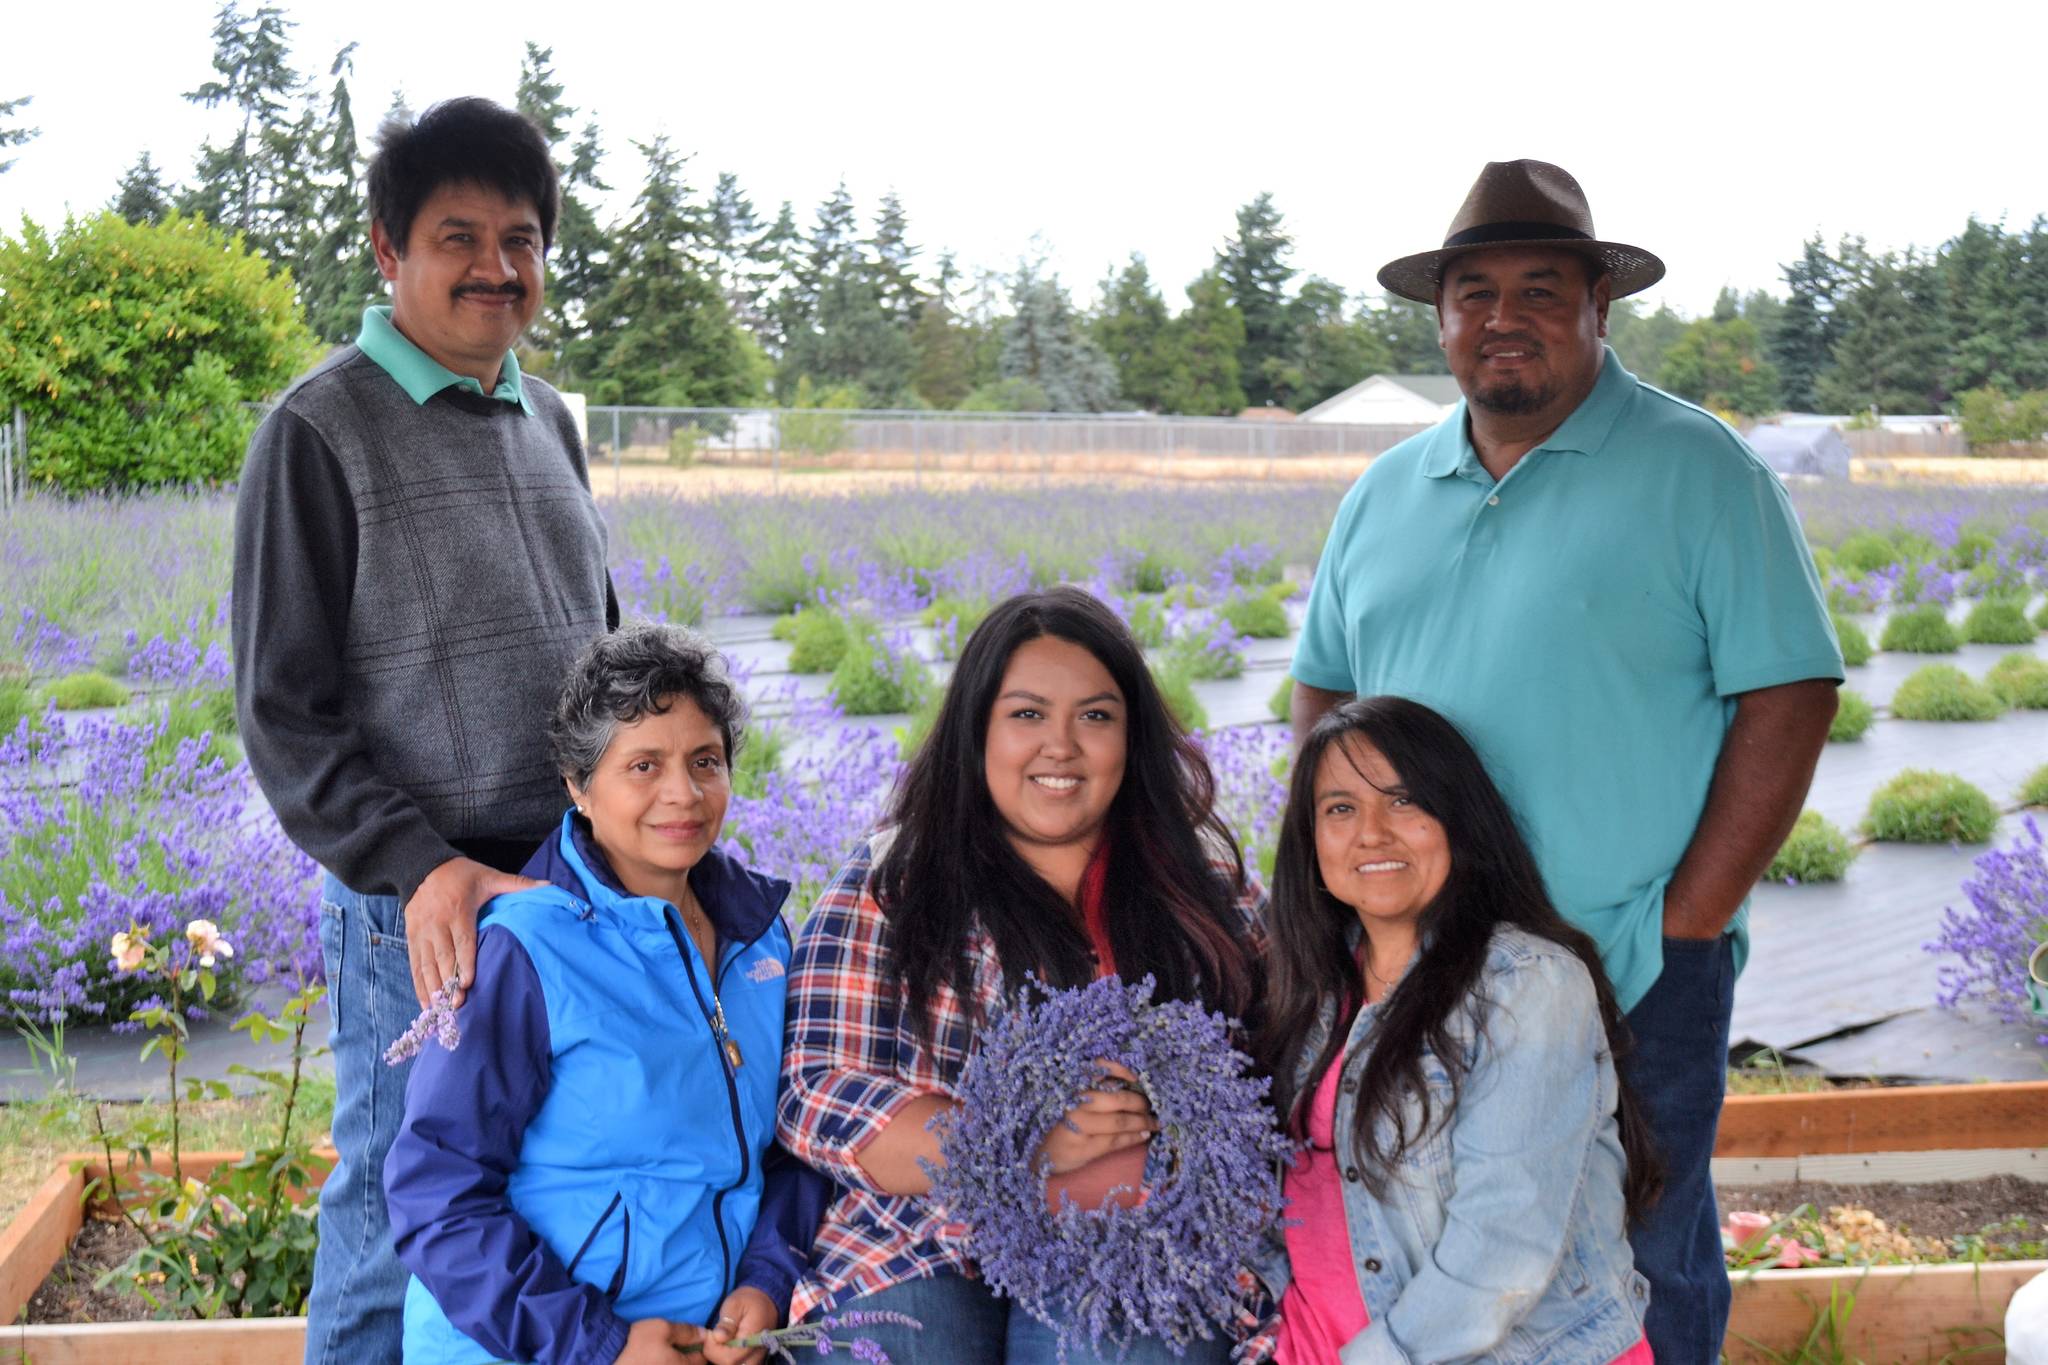 Brothers Victor and Sergio Gonzalez with their families, Victor’s wife Maribel, and Sergio’s daughter Melissa and his wife Monica, planted 1,000 lavender plants two years ago for Meli’s Lavender Farm. Now they look to expand to 2,500 more plants in the next year. (Matthew Nash/Olympic Peninsula News Group)